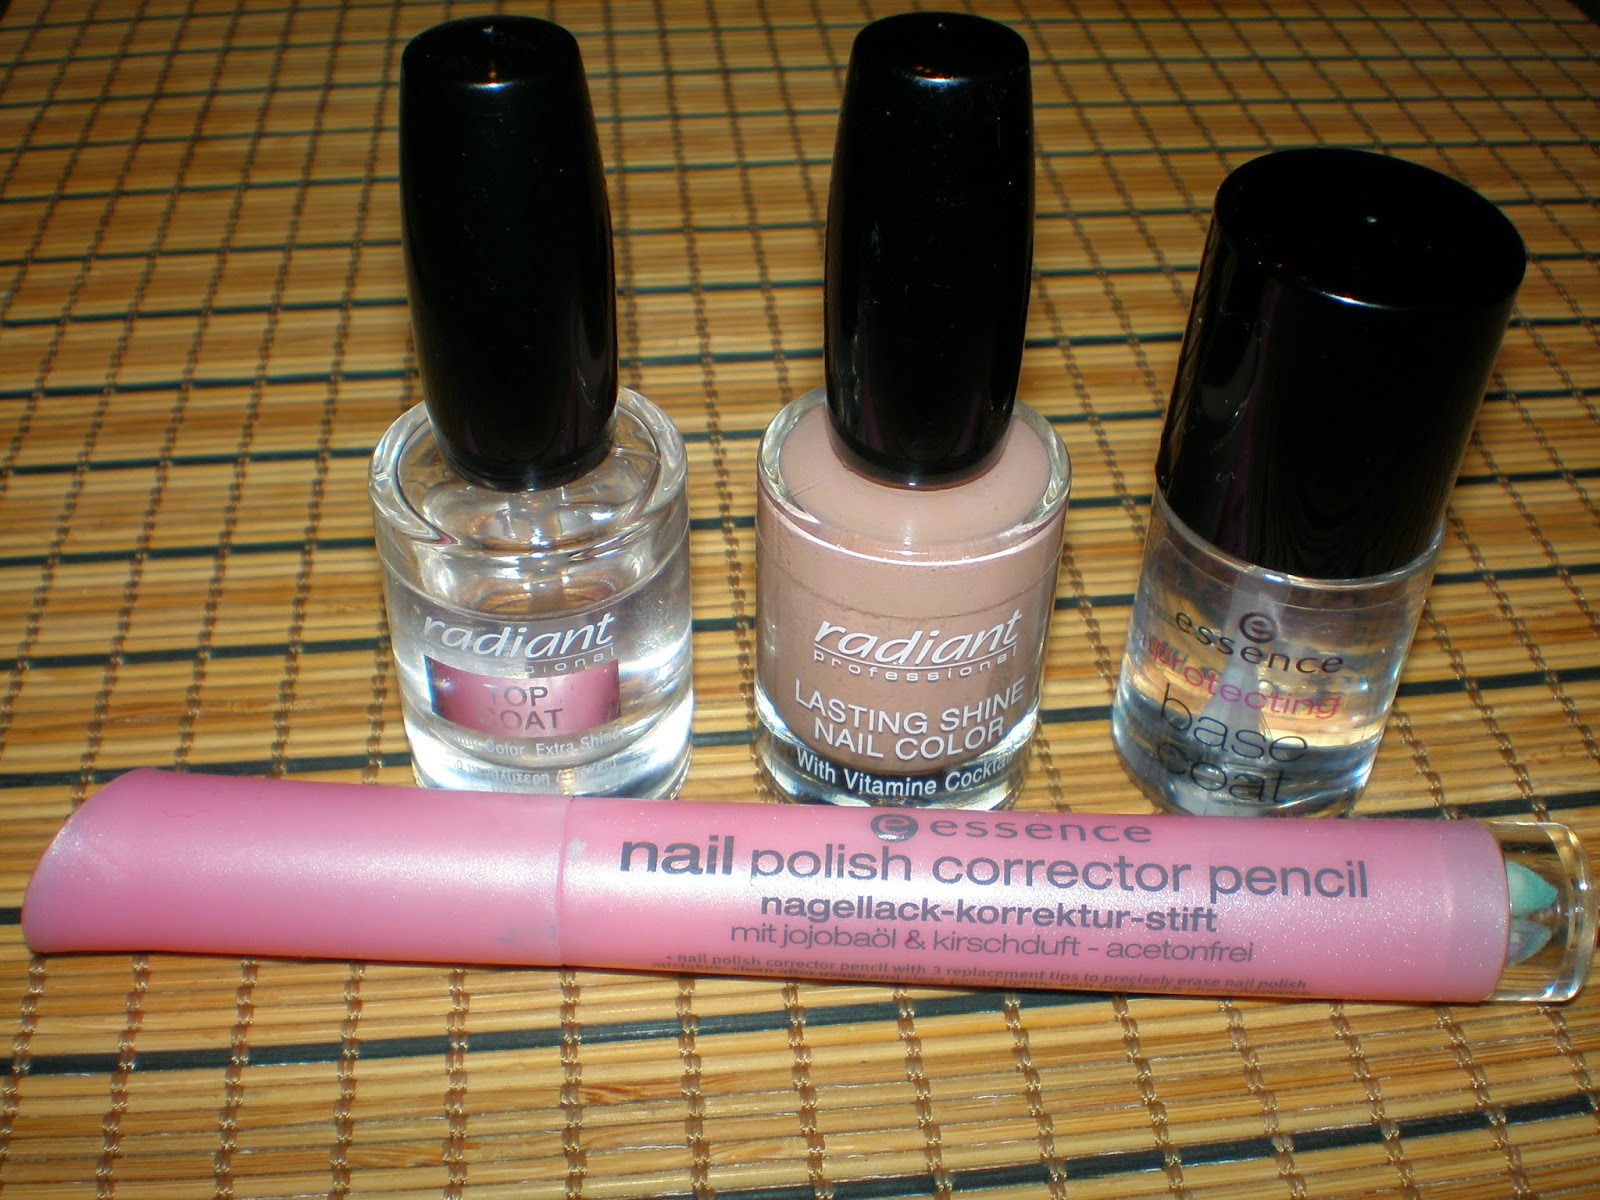 Manicure with Radiant and Essence products